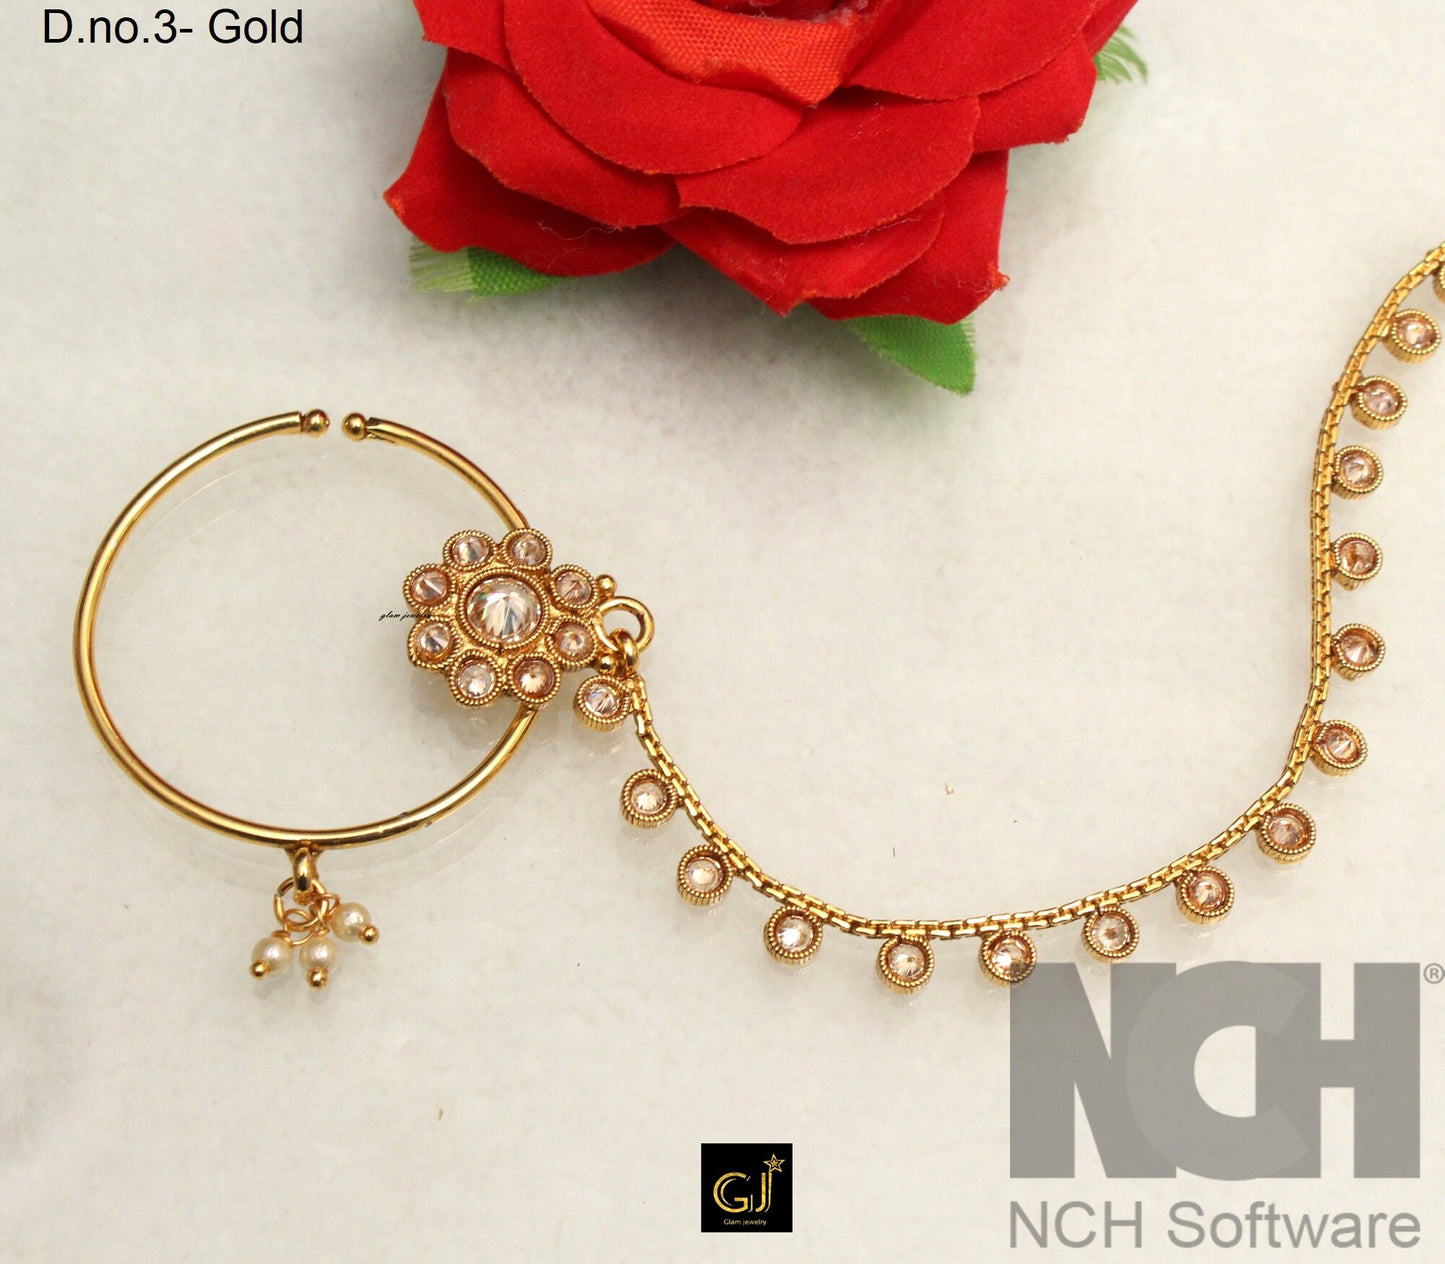 Indian Nose Ring Nath Bridal Wedding Nathini/Non Pierced Gold Plat Nose Hoop Chain/Bollywood Style Jewelry Jewellery